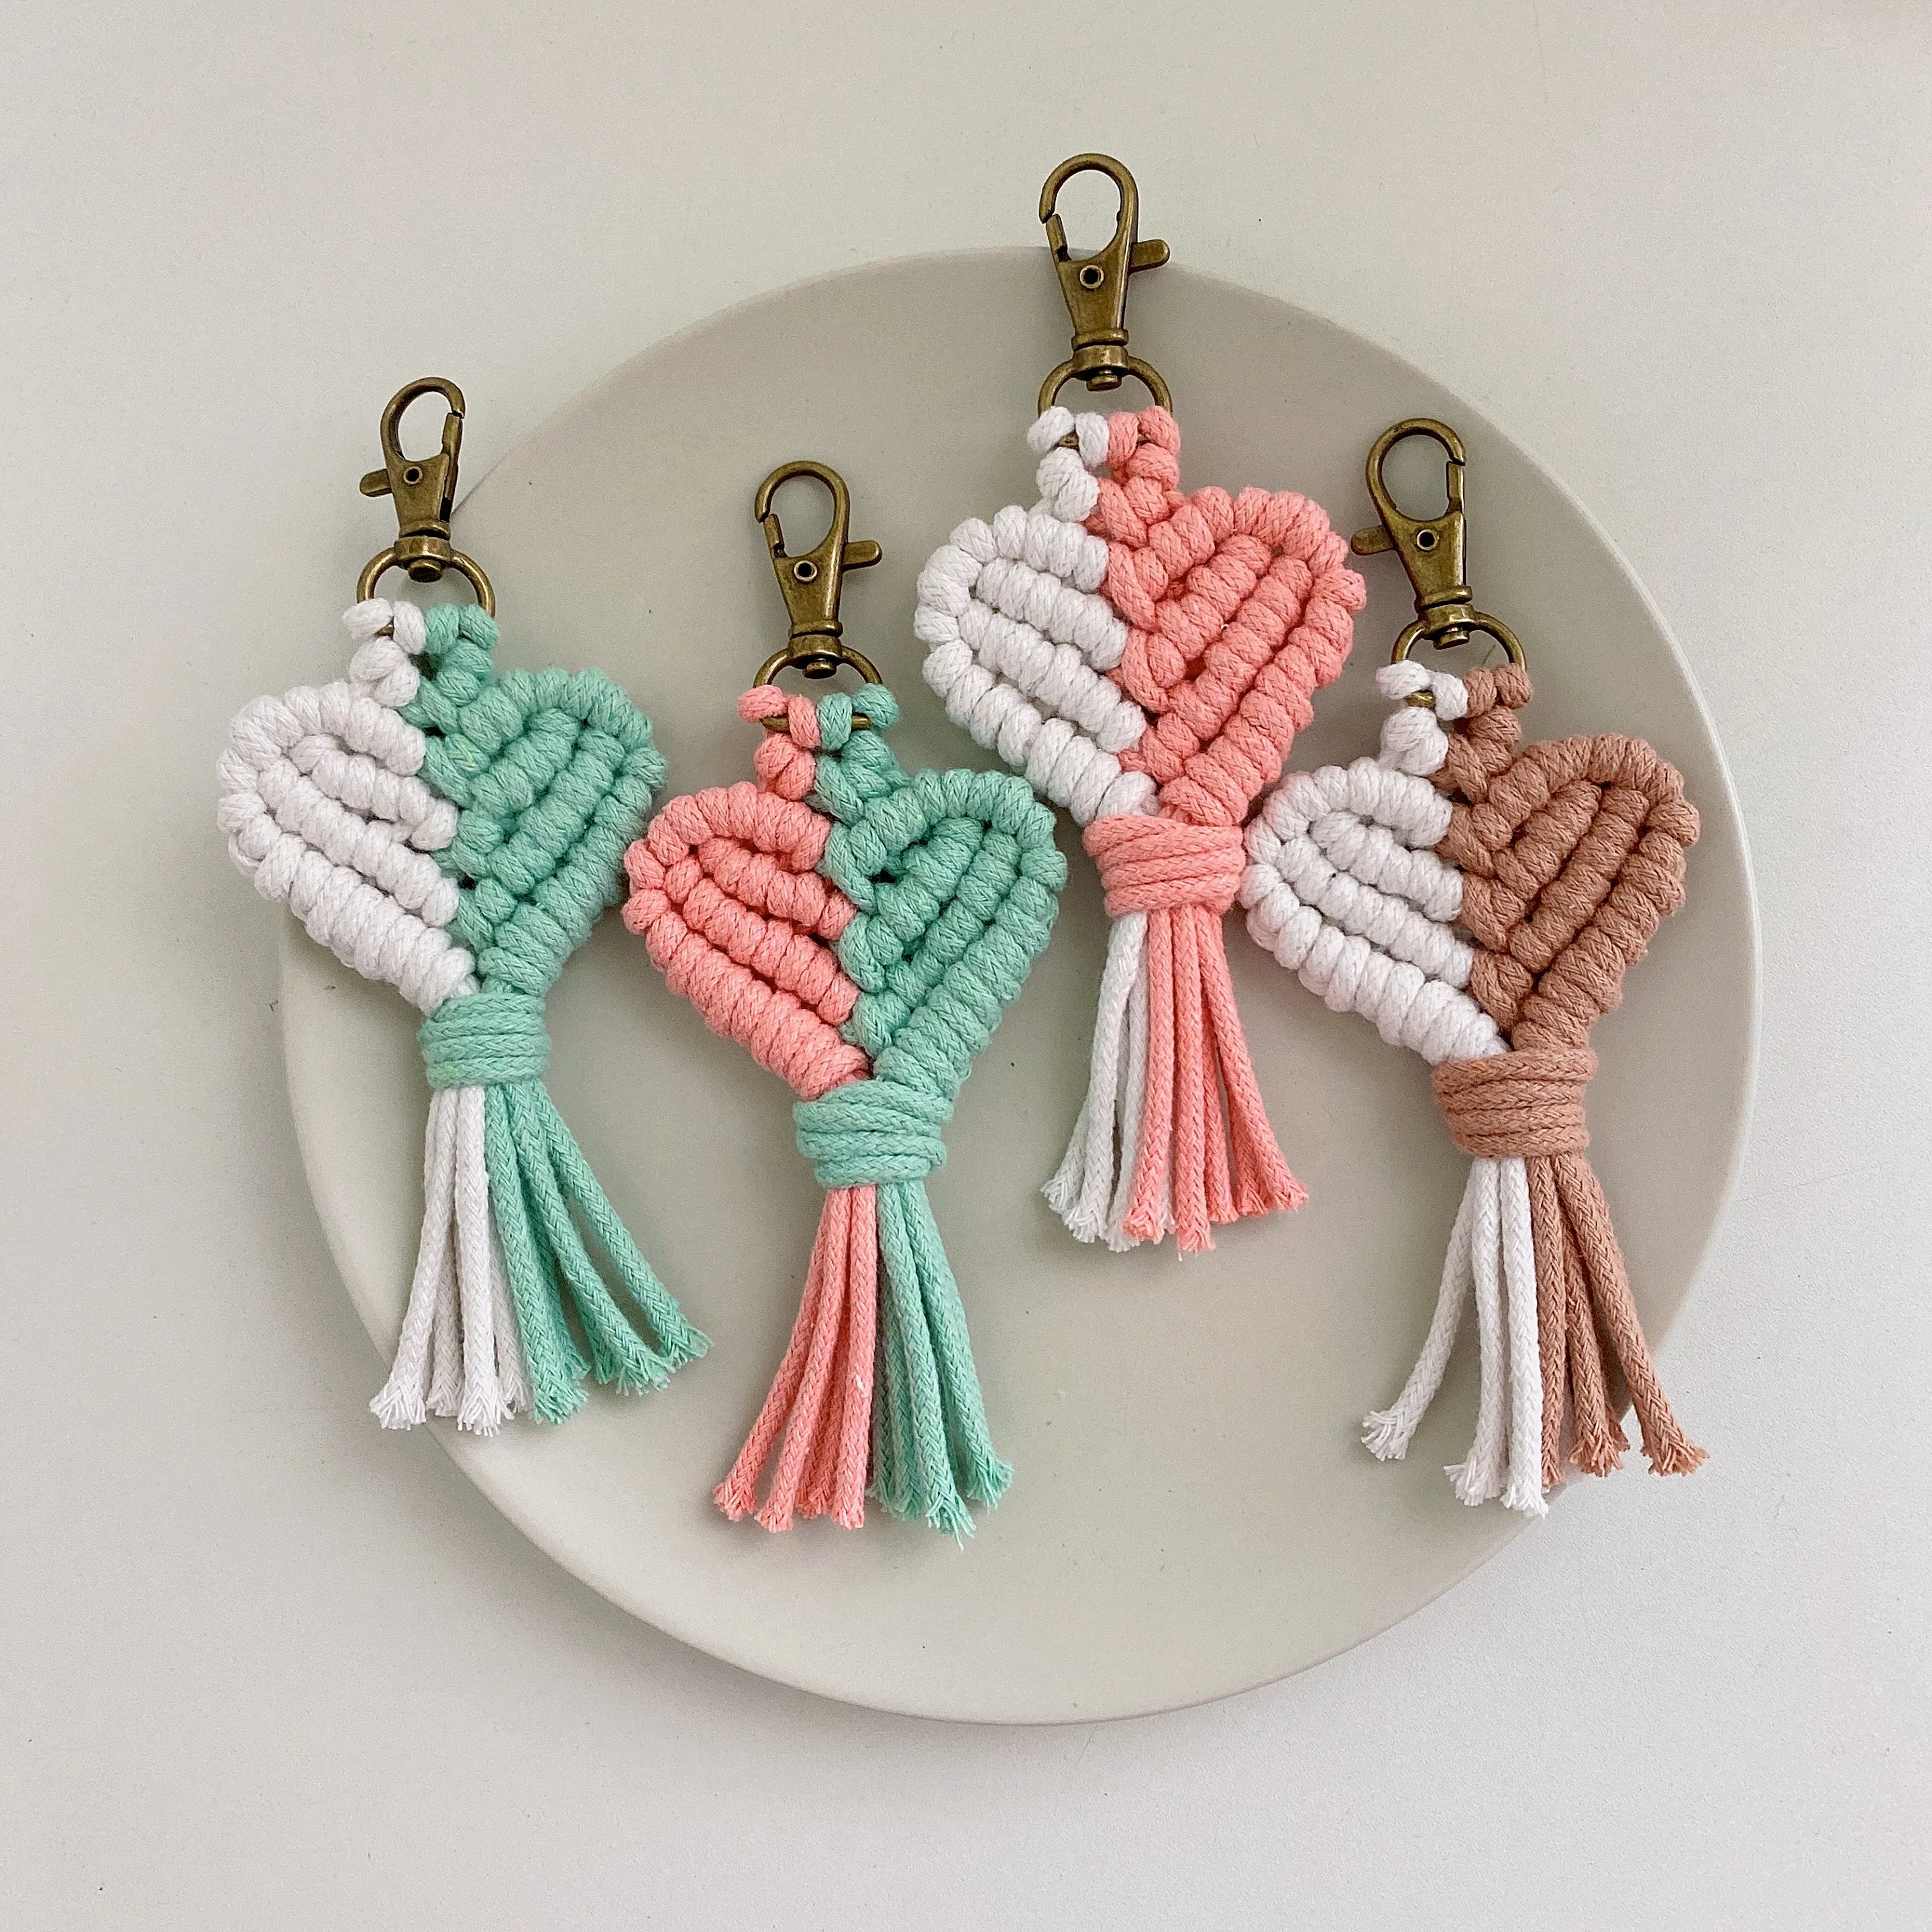 Macrame Hobo Keychain Handmade Heart-shaped Bag Pendant Gift Car Keys Mother's Day gift Fashion Jewelry Accessories Wholesale silicone keychain moulds pendant molds small heart shaped diy handmade gadget k3nd